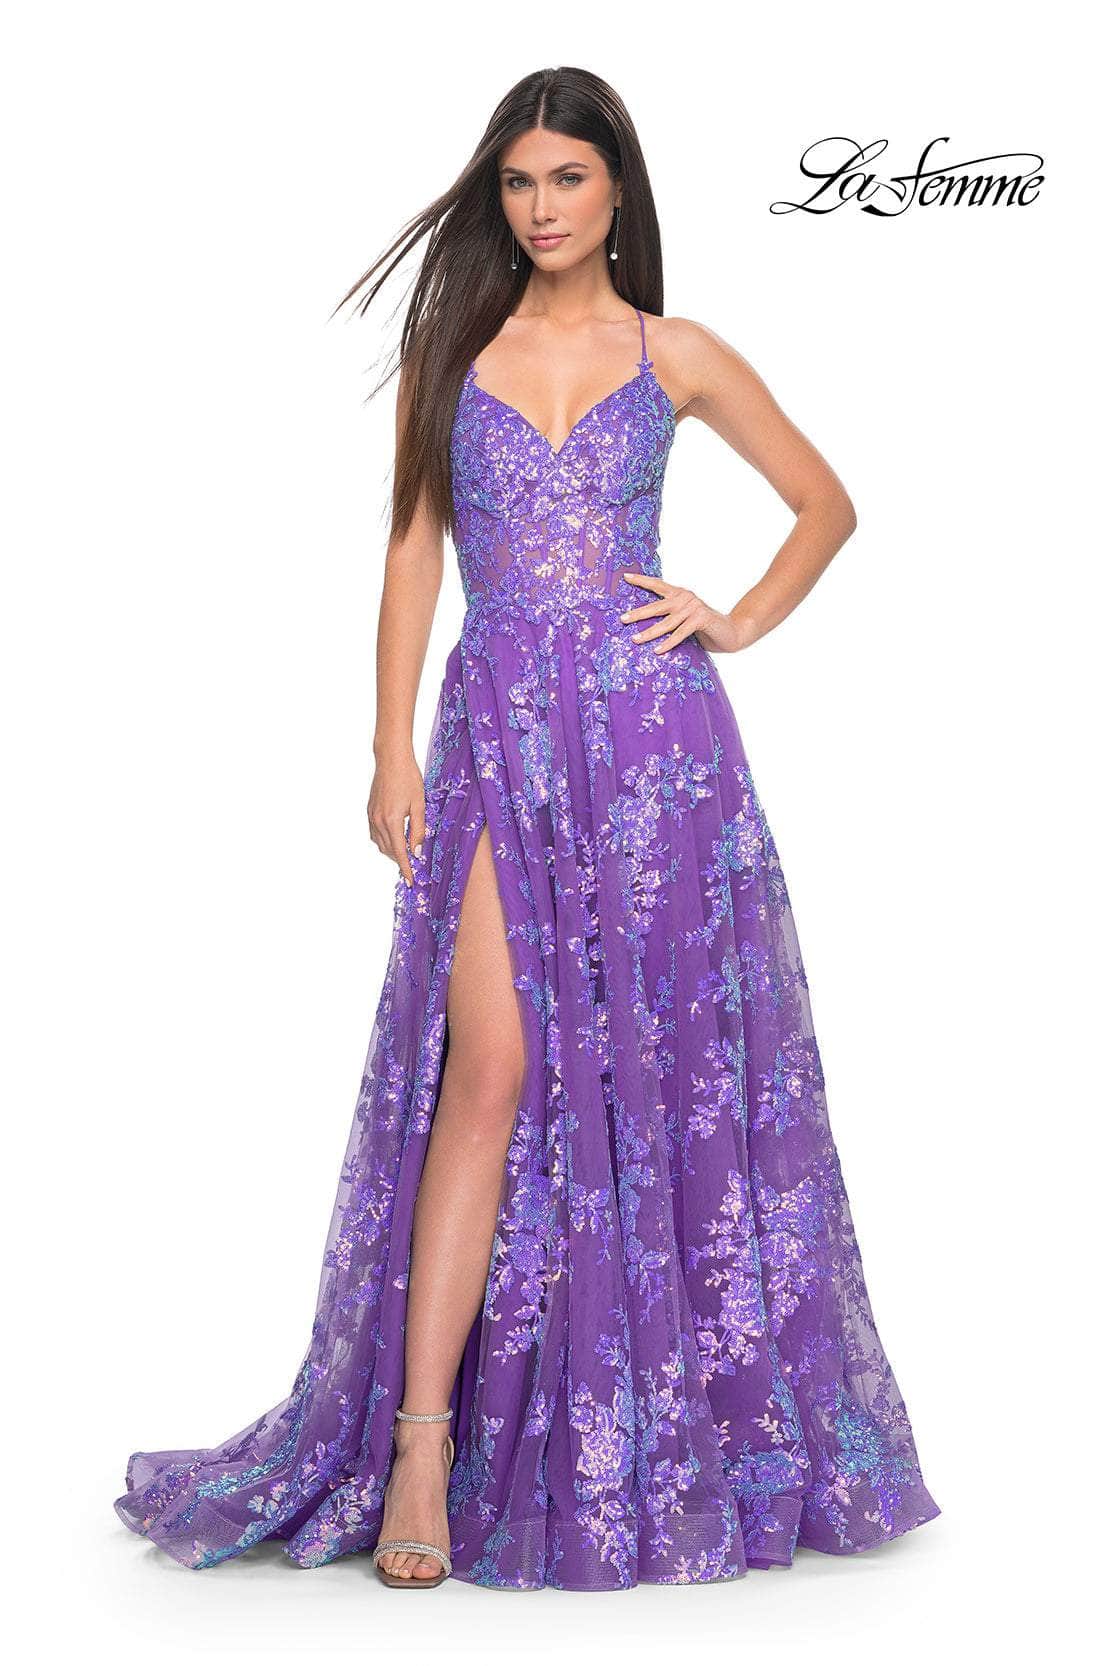 La Femme 32291 - Shimmer Sleeveless A-Line Prom Gown
